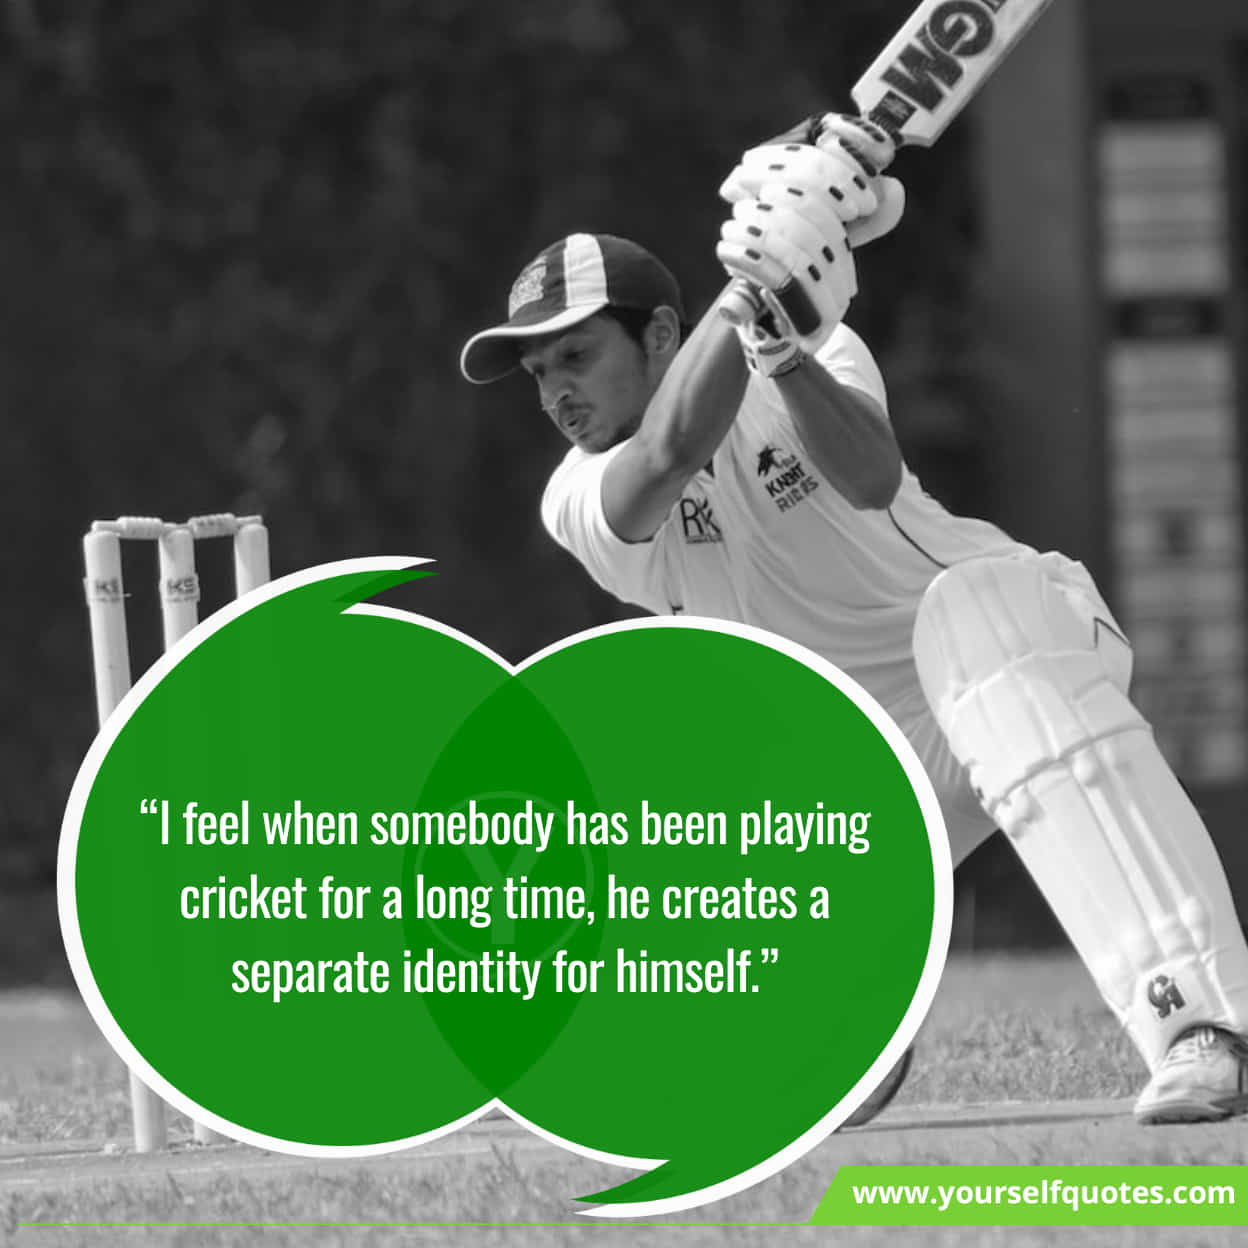 Inspirational Cricket Quotes For Life